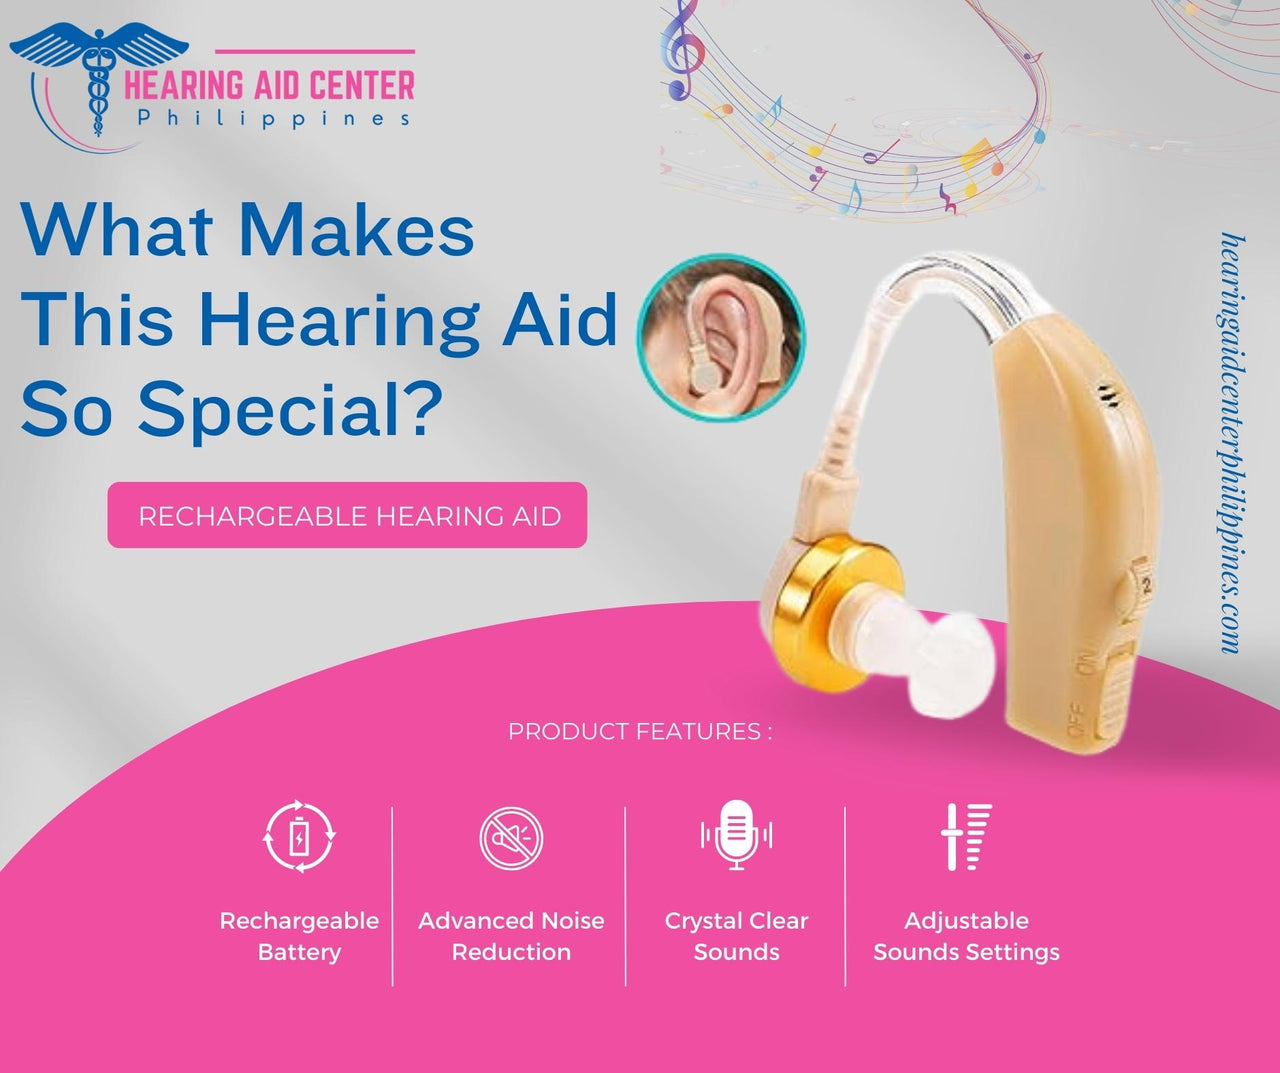 BTE Rechargeable Hearing Aid (Skin-Tone)